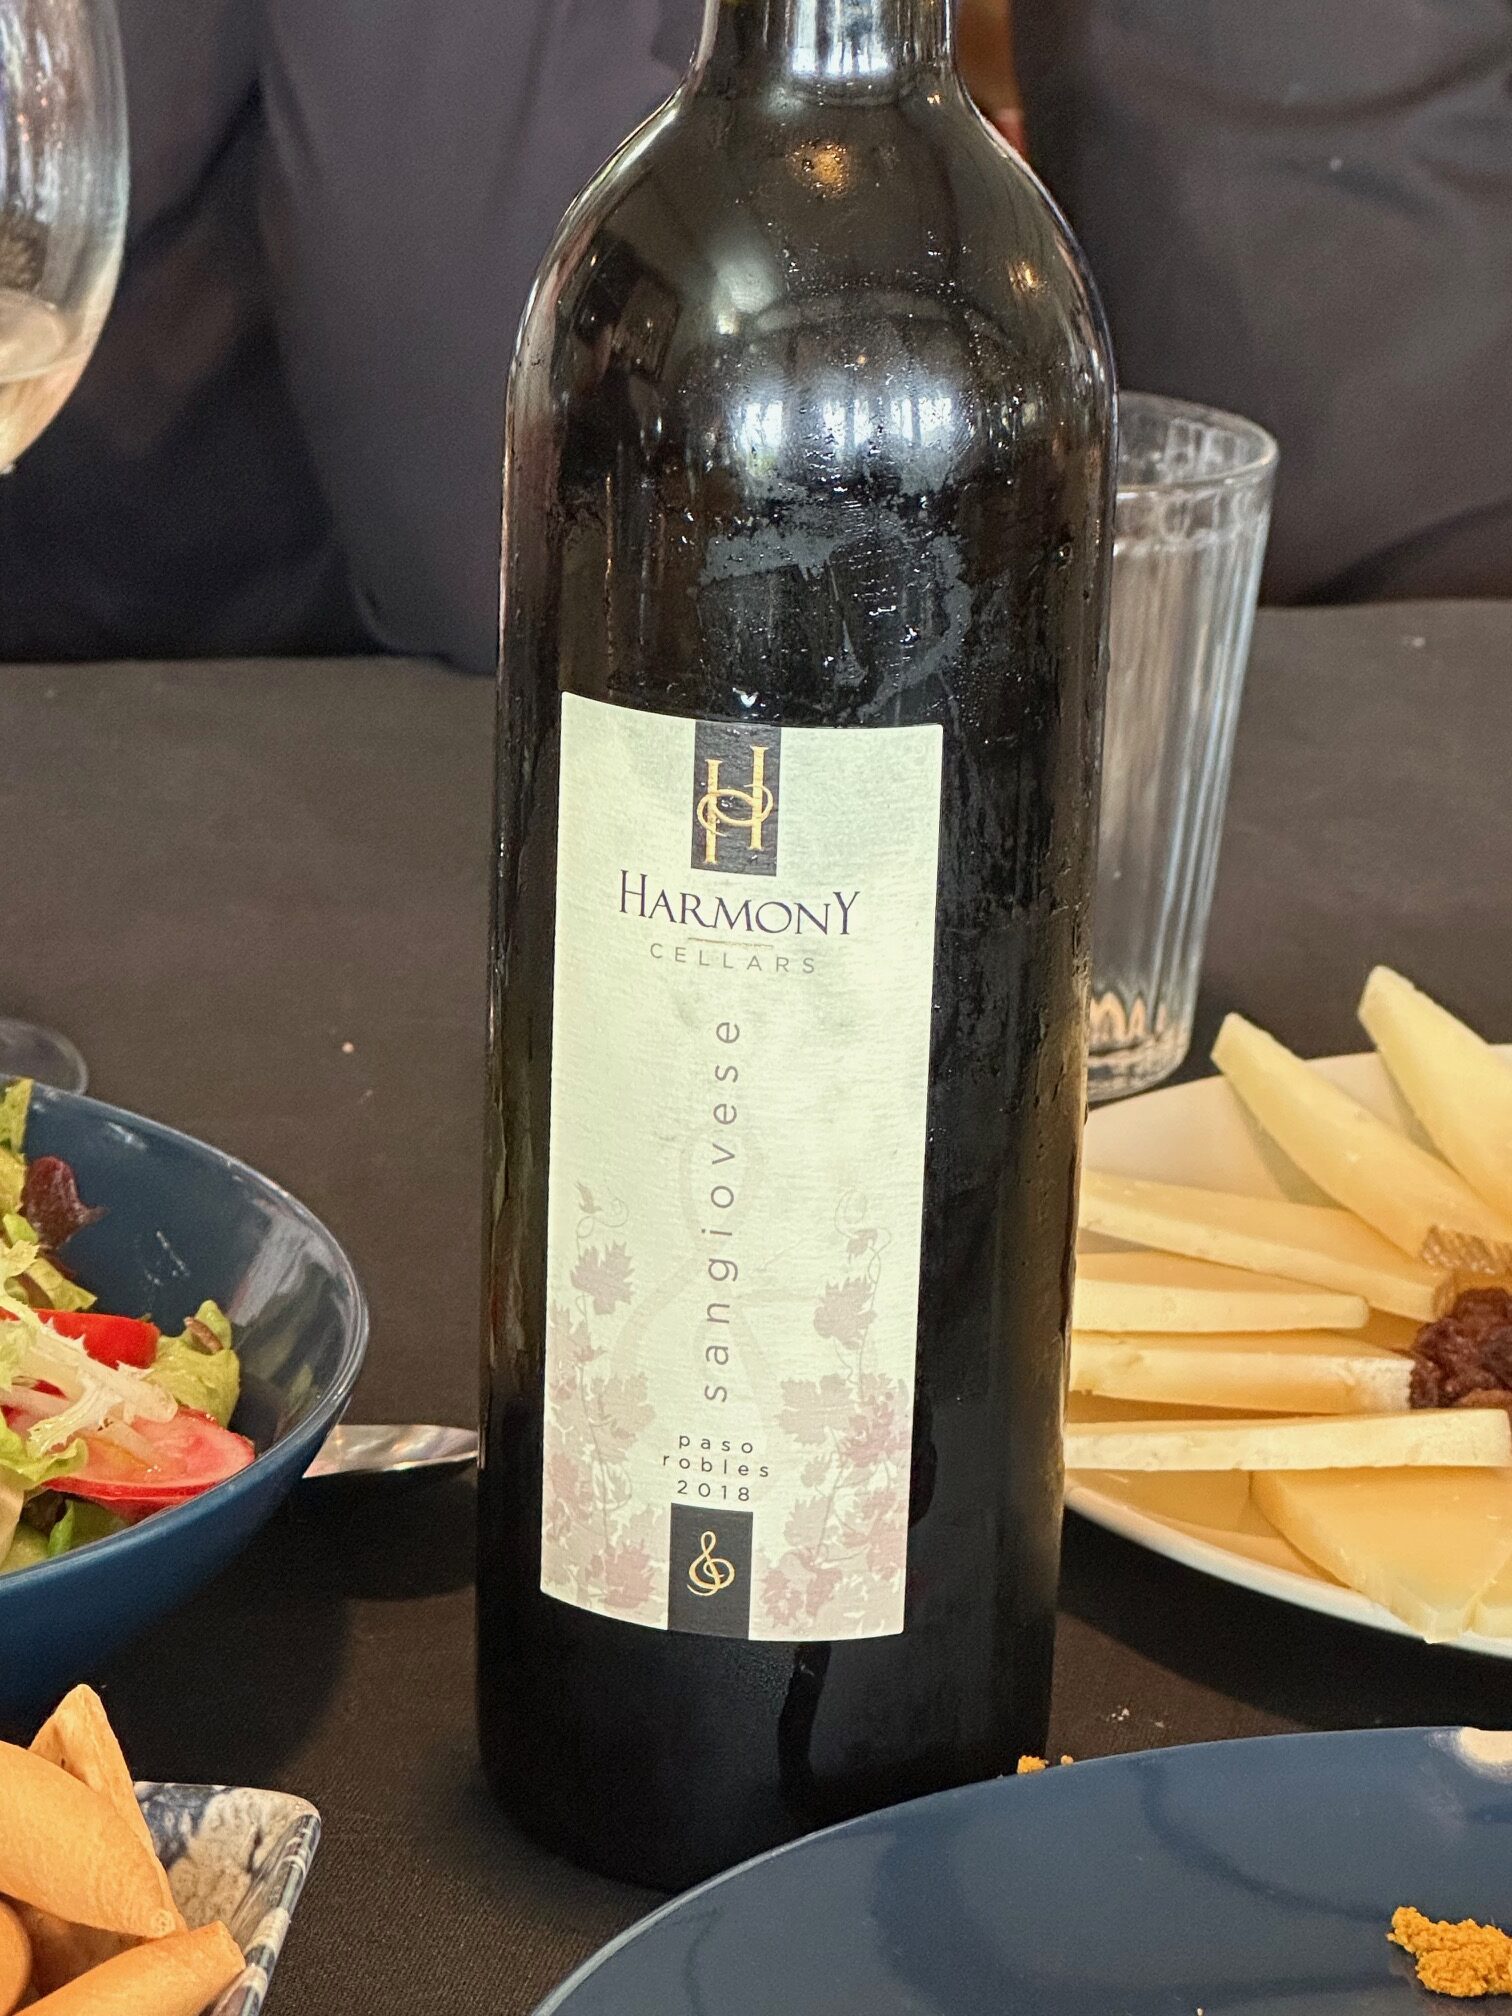 Harmony Cellars Wine At Lunch - Wine Lovers Travel